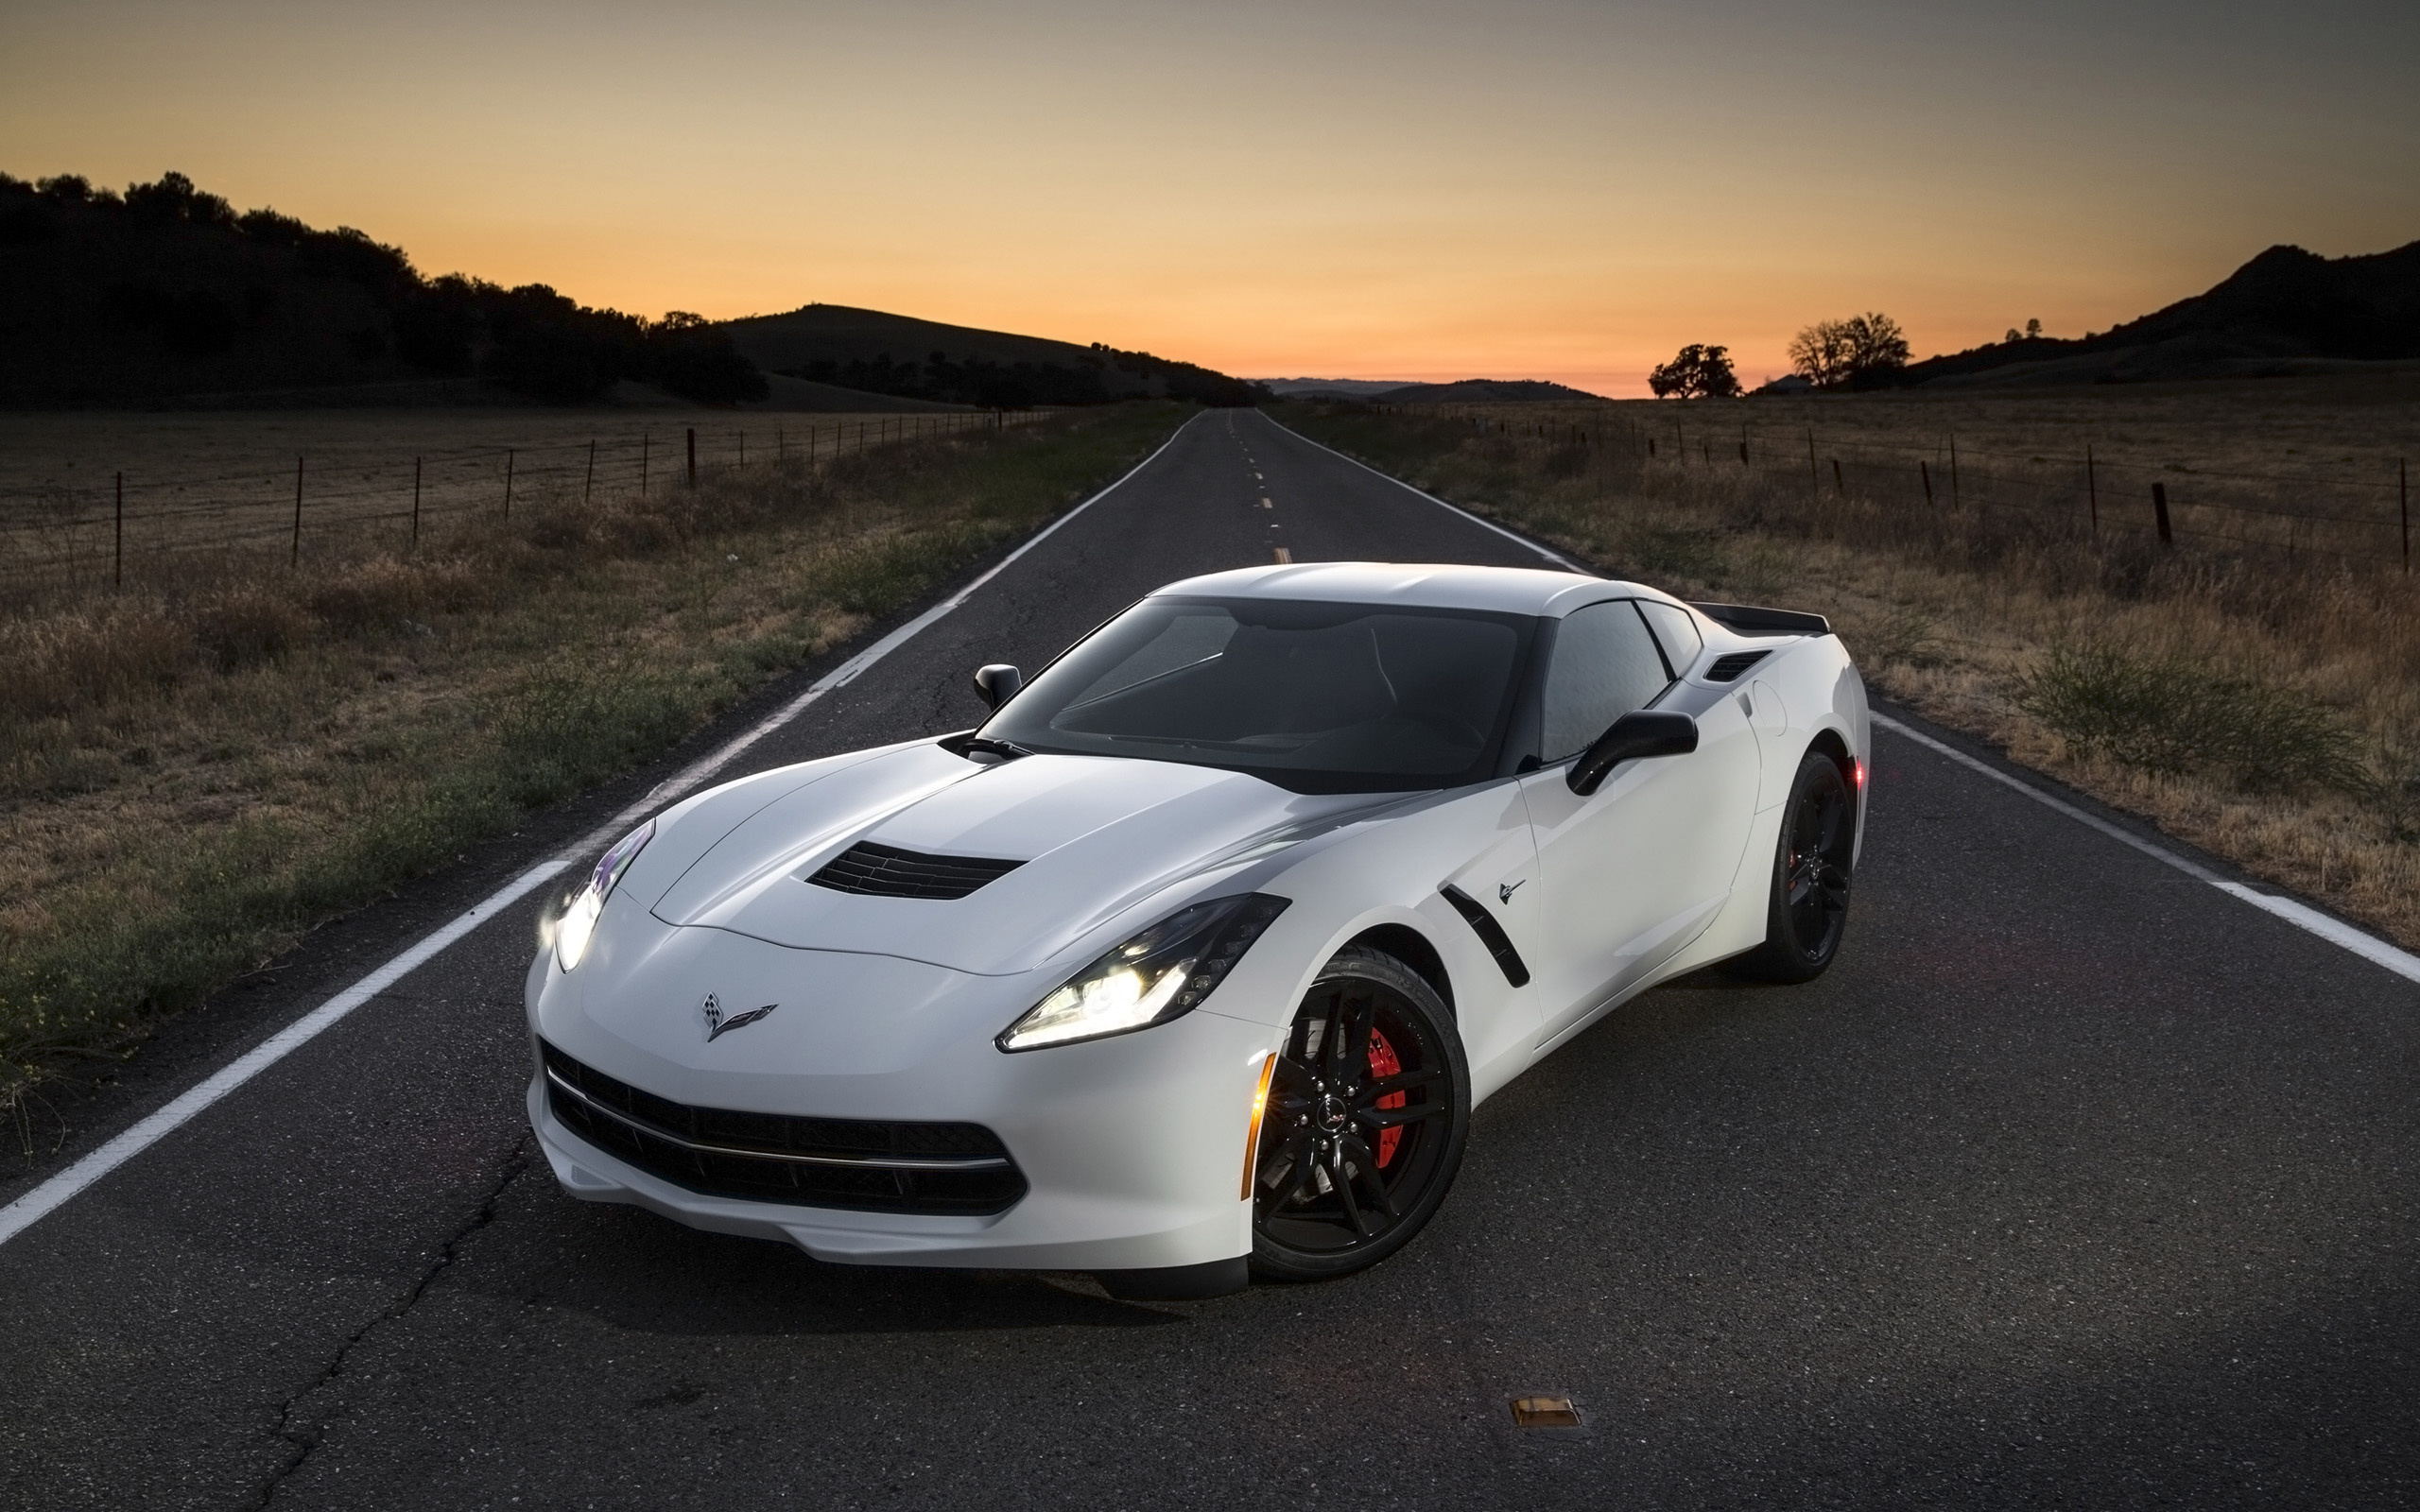 Corvette: Stingray C7, Engine with turbo-boost technology, High-speed driving. 2560x1600 HD Wallpaper.